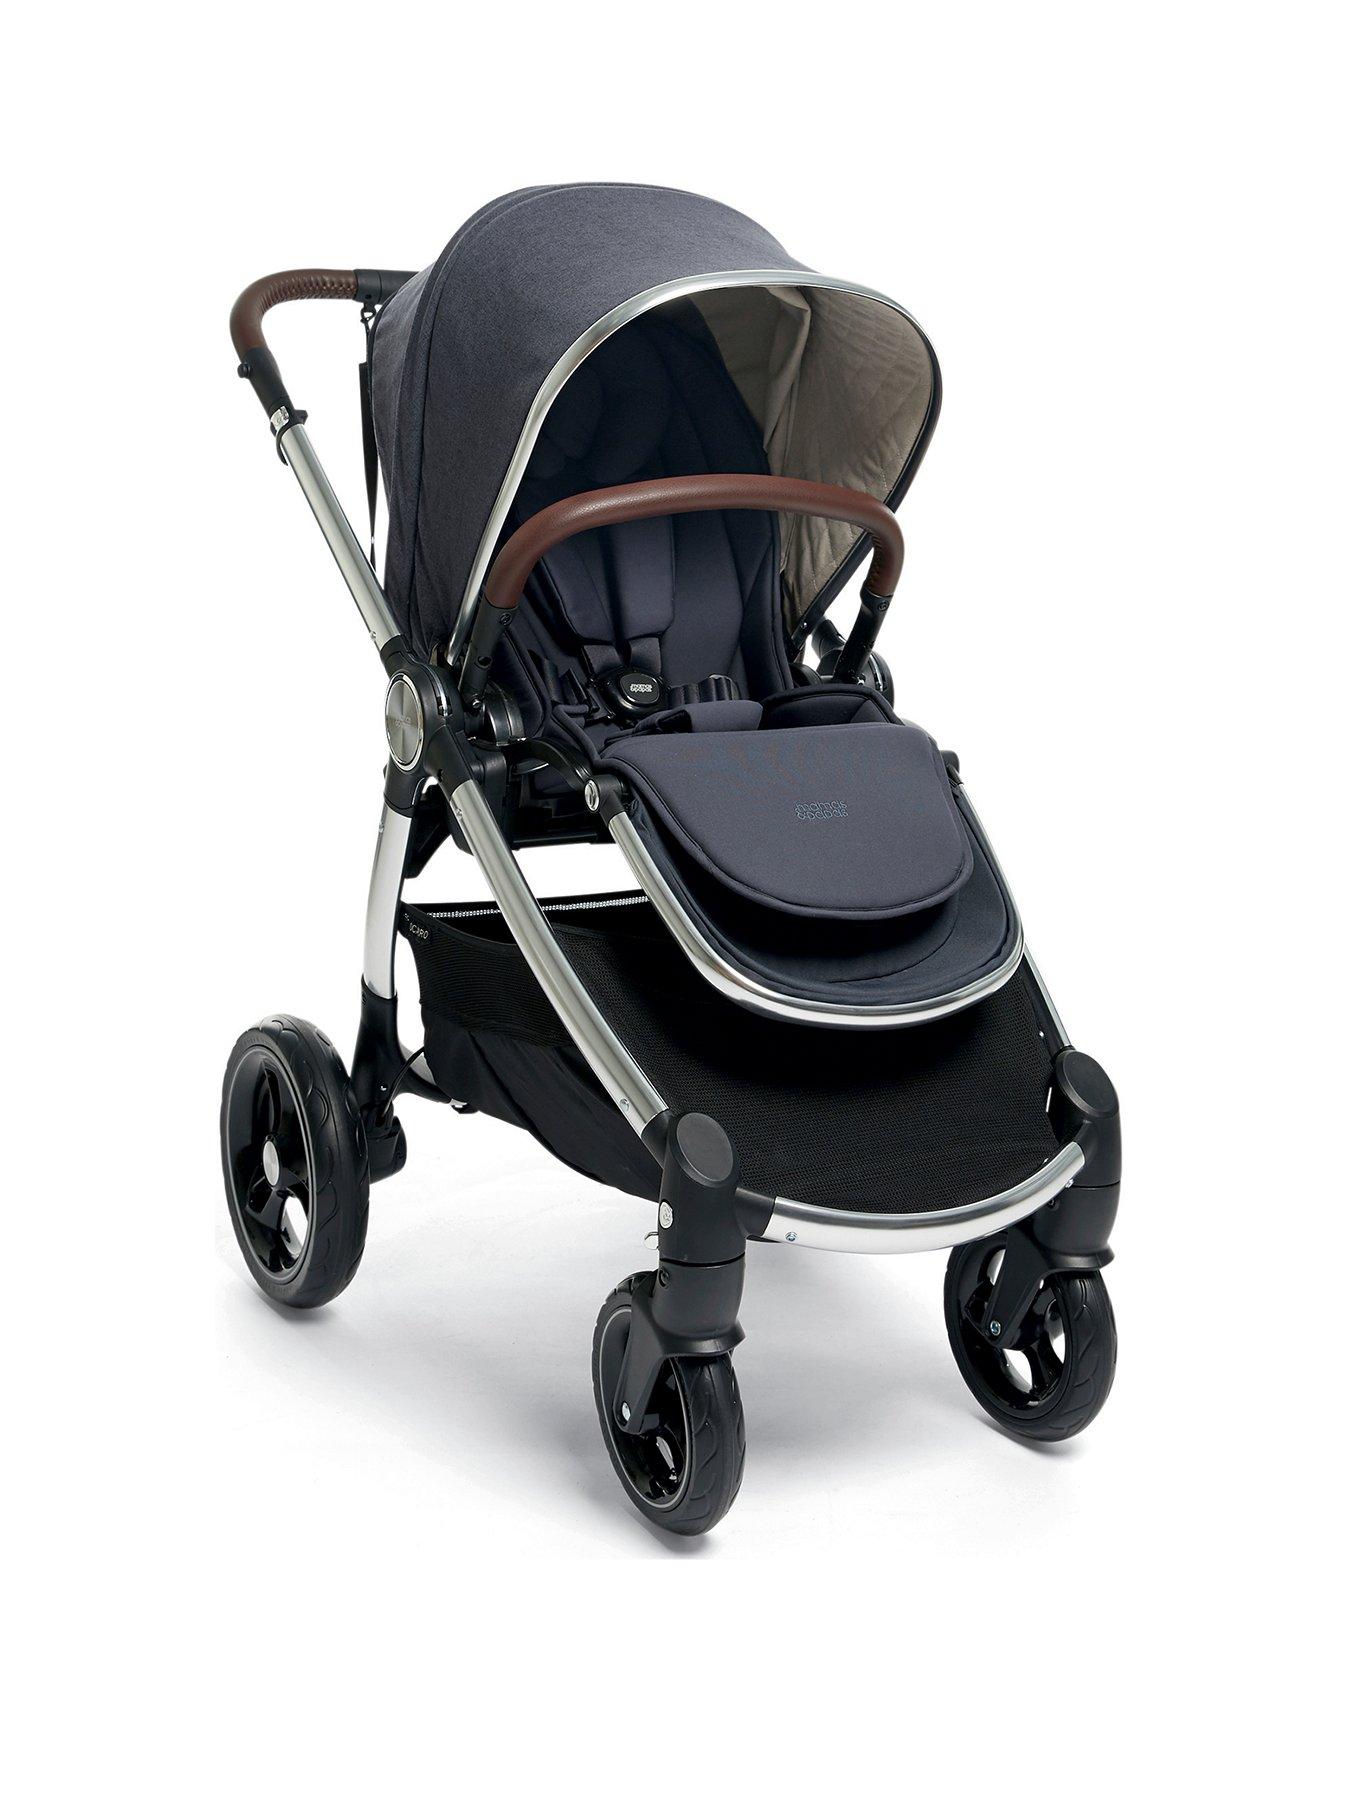 mamas and papas 8 in 1 travel system